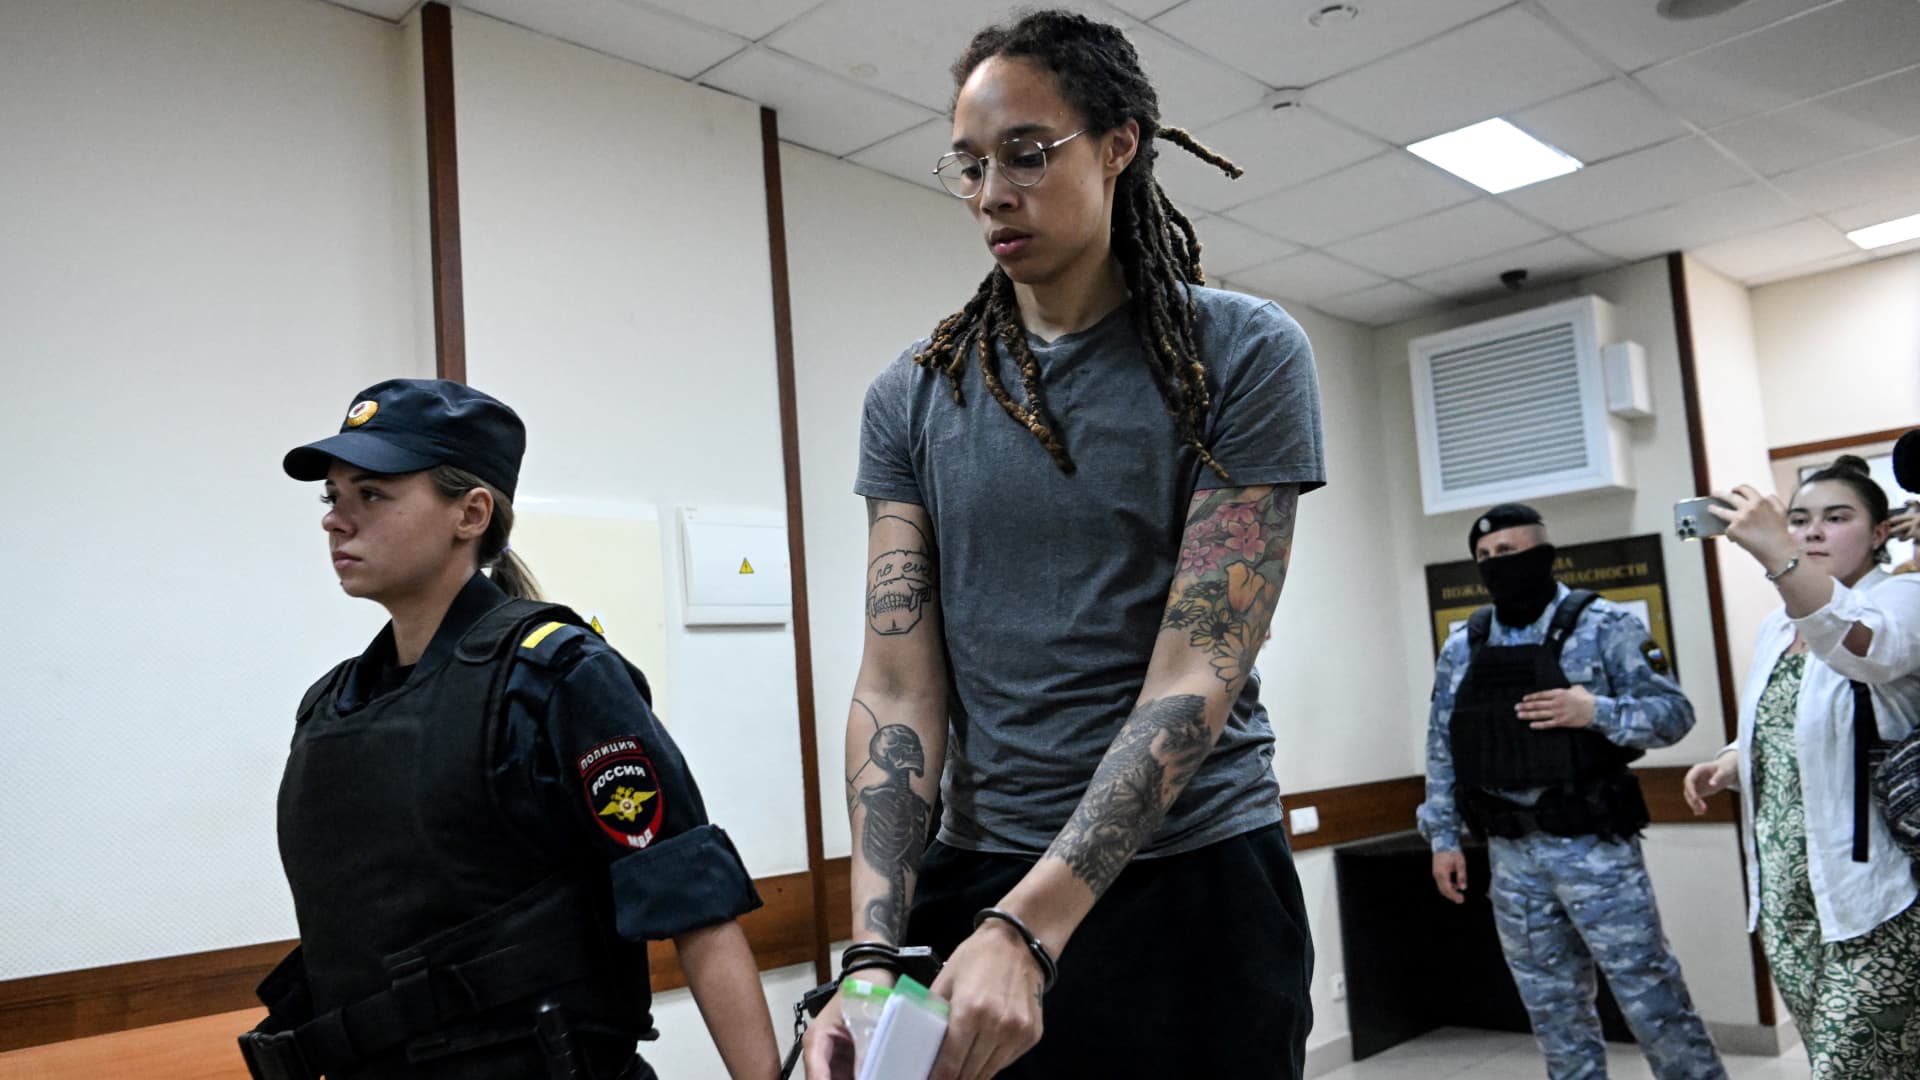 US' Women's National Basketball Association (NBA) basketball player Brittney Griner, who was detained at Moscow's Sheremetyevo airport and later charged with illegal possession of cannabis, waits for the verdict inside a defendants' cage before a court hearing in Khimki outside Moscow, on August 4, 2022. 